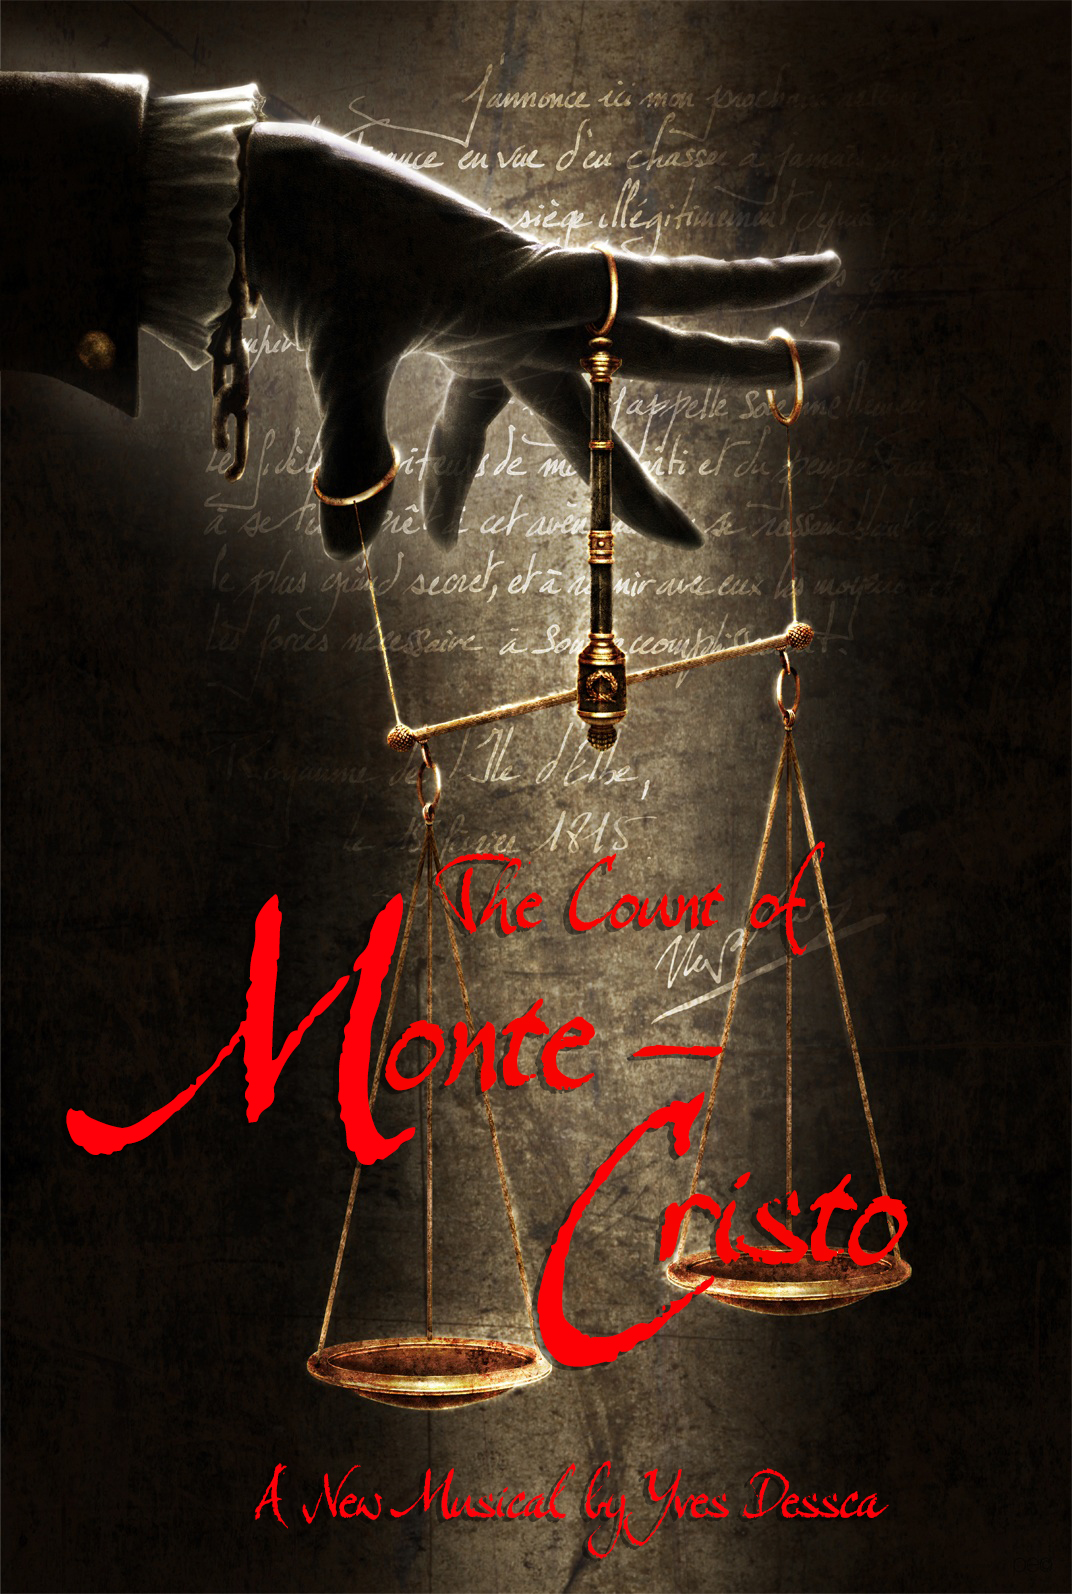 The Count of MonteCristo Tickets 11/05/15